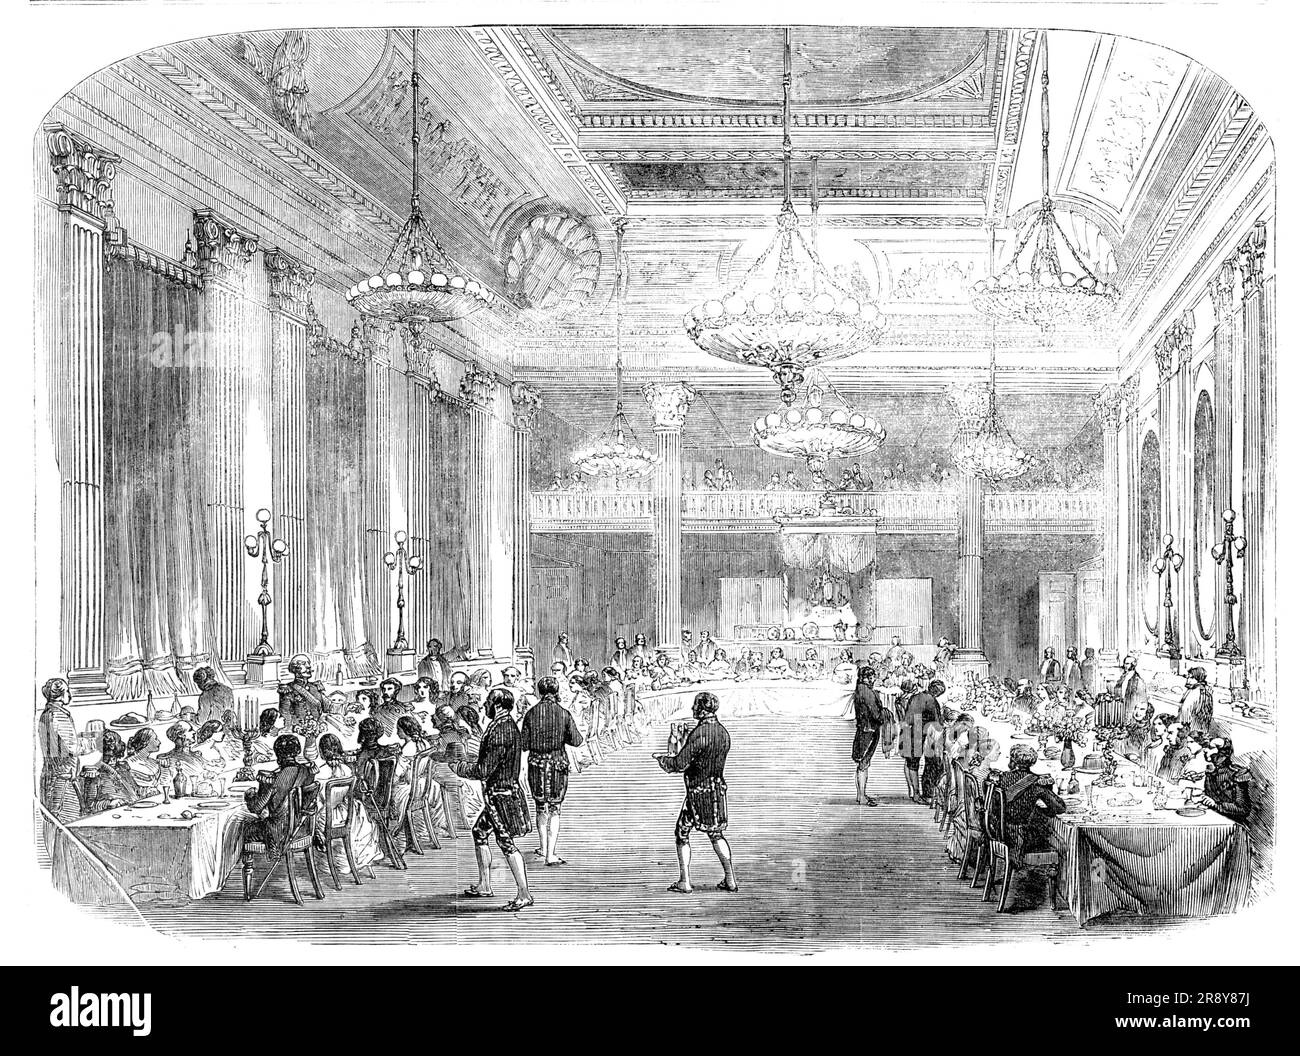 Grand Banquet to the Knights of St. Patrick, in Dublin Castle, 1857. 'A grand Chapter of the Most Illustrious Order of St. Patrick was held...in the Presence Chamber...for the investure of the Earl of Granard and Viscount Gough, as Knights of the Order...The ceremony, which commenced at three o'clock, was brief, but of an impressive character, and was in every particular conducted under the direction of Sir Bernard Burke, the Ulster King of Arms, in strict accordance with the statutes and precedents...The entire hall has been recently painted and ornamented, and the effect produced by the soft Stock Photo